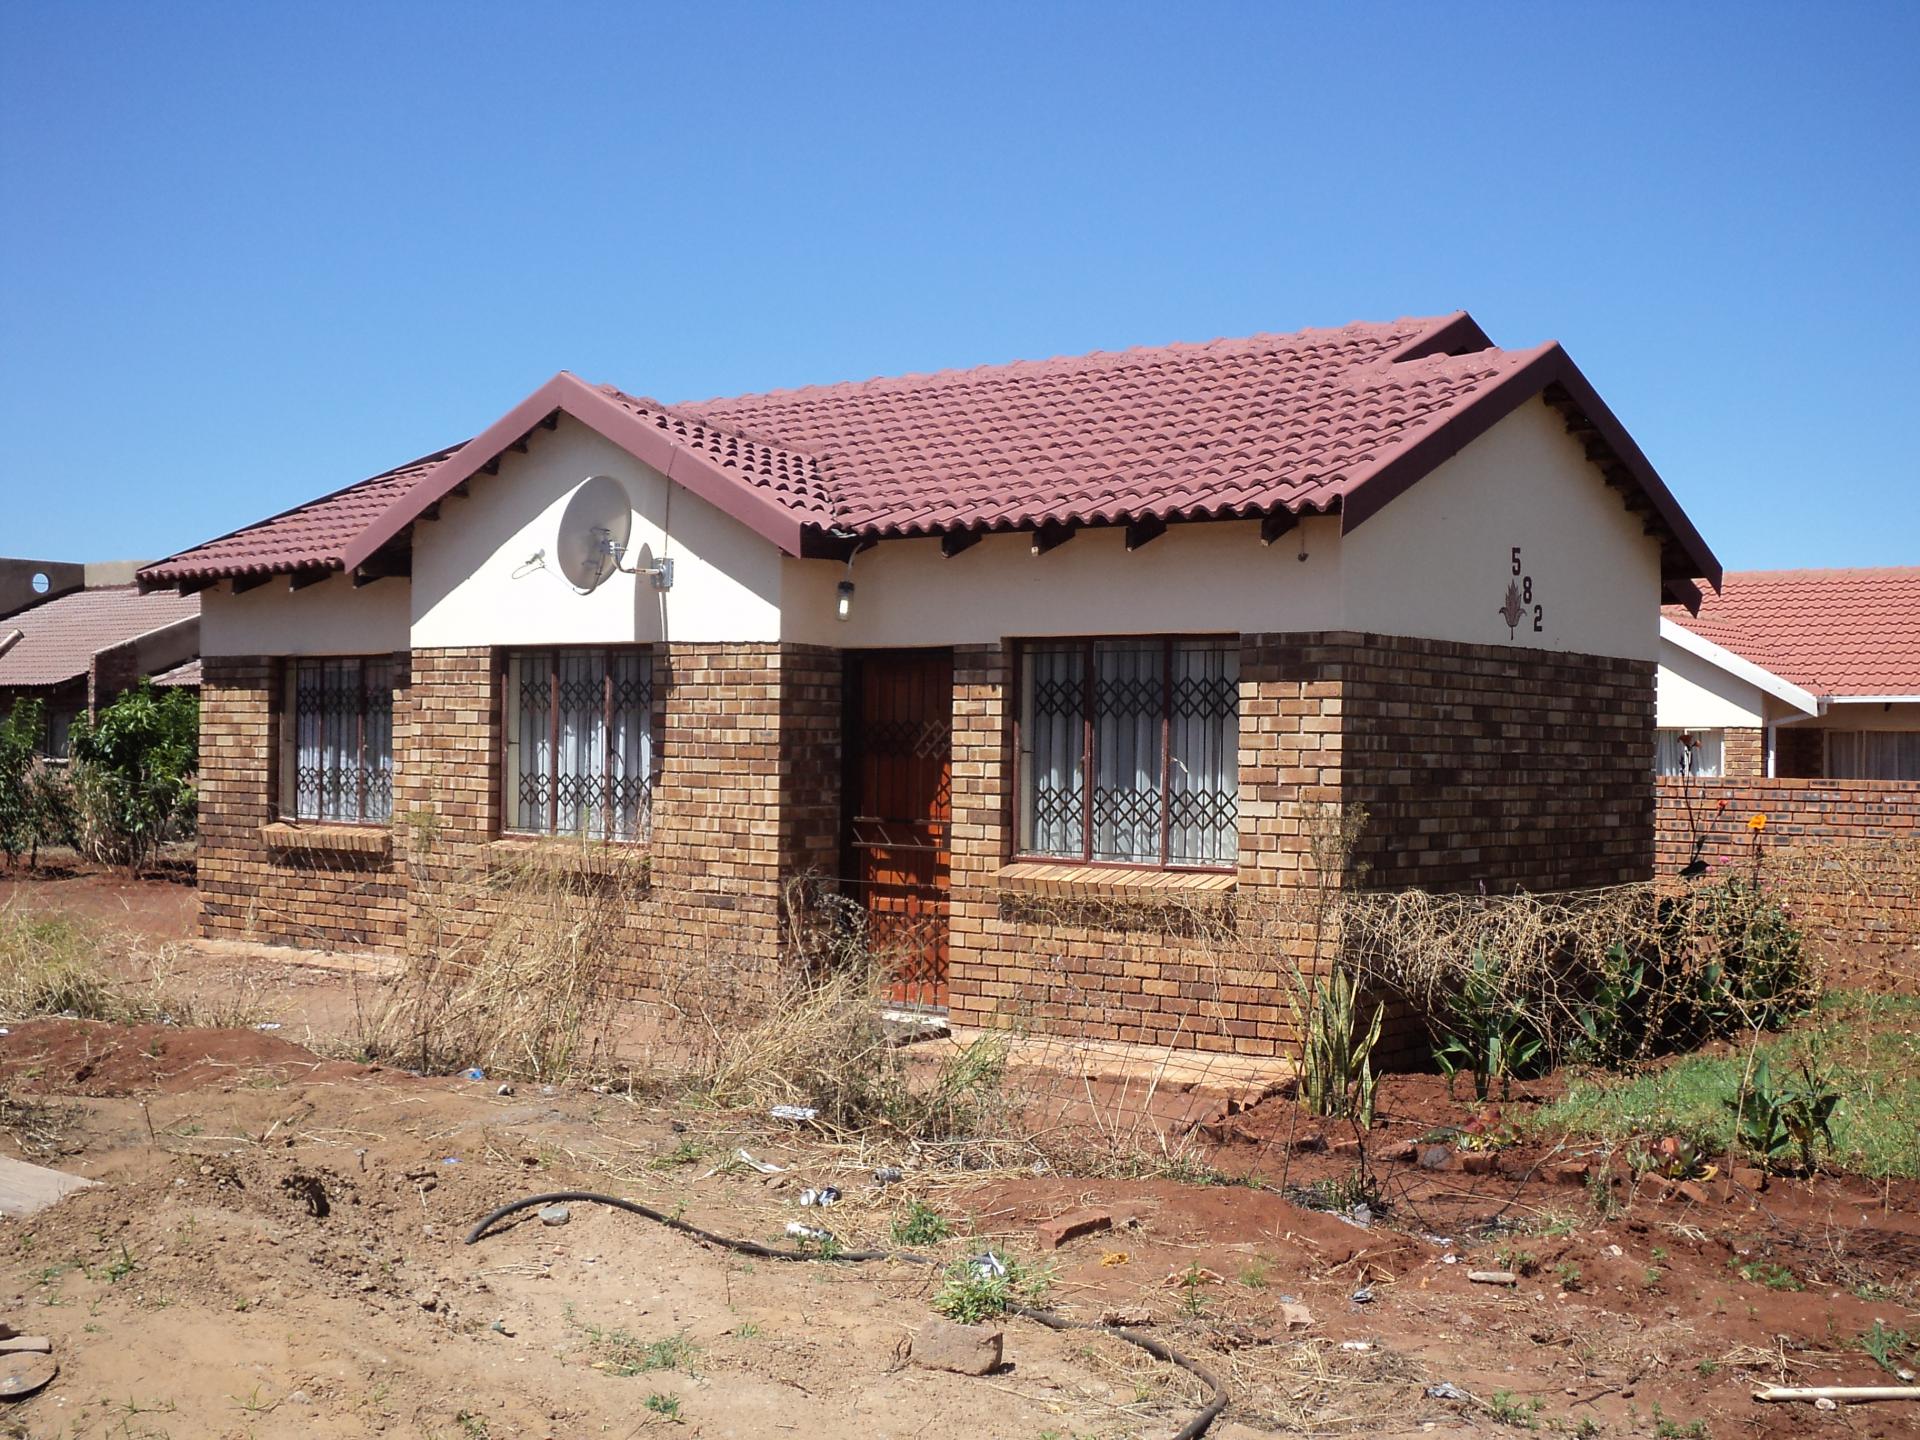 House Plans for Sale in Polokwane